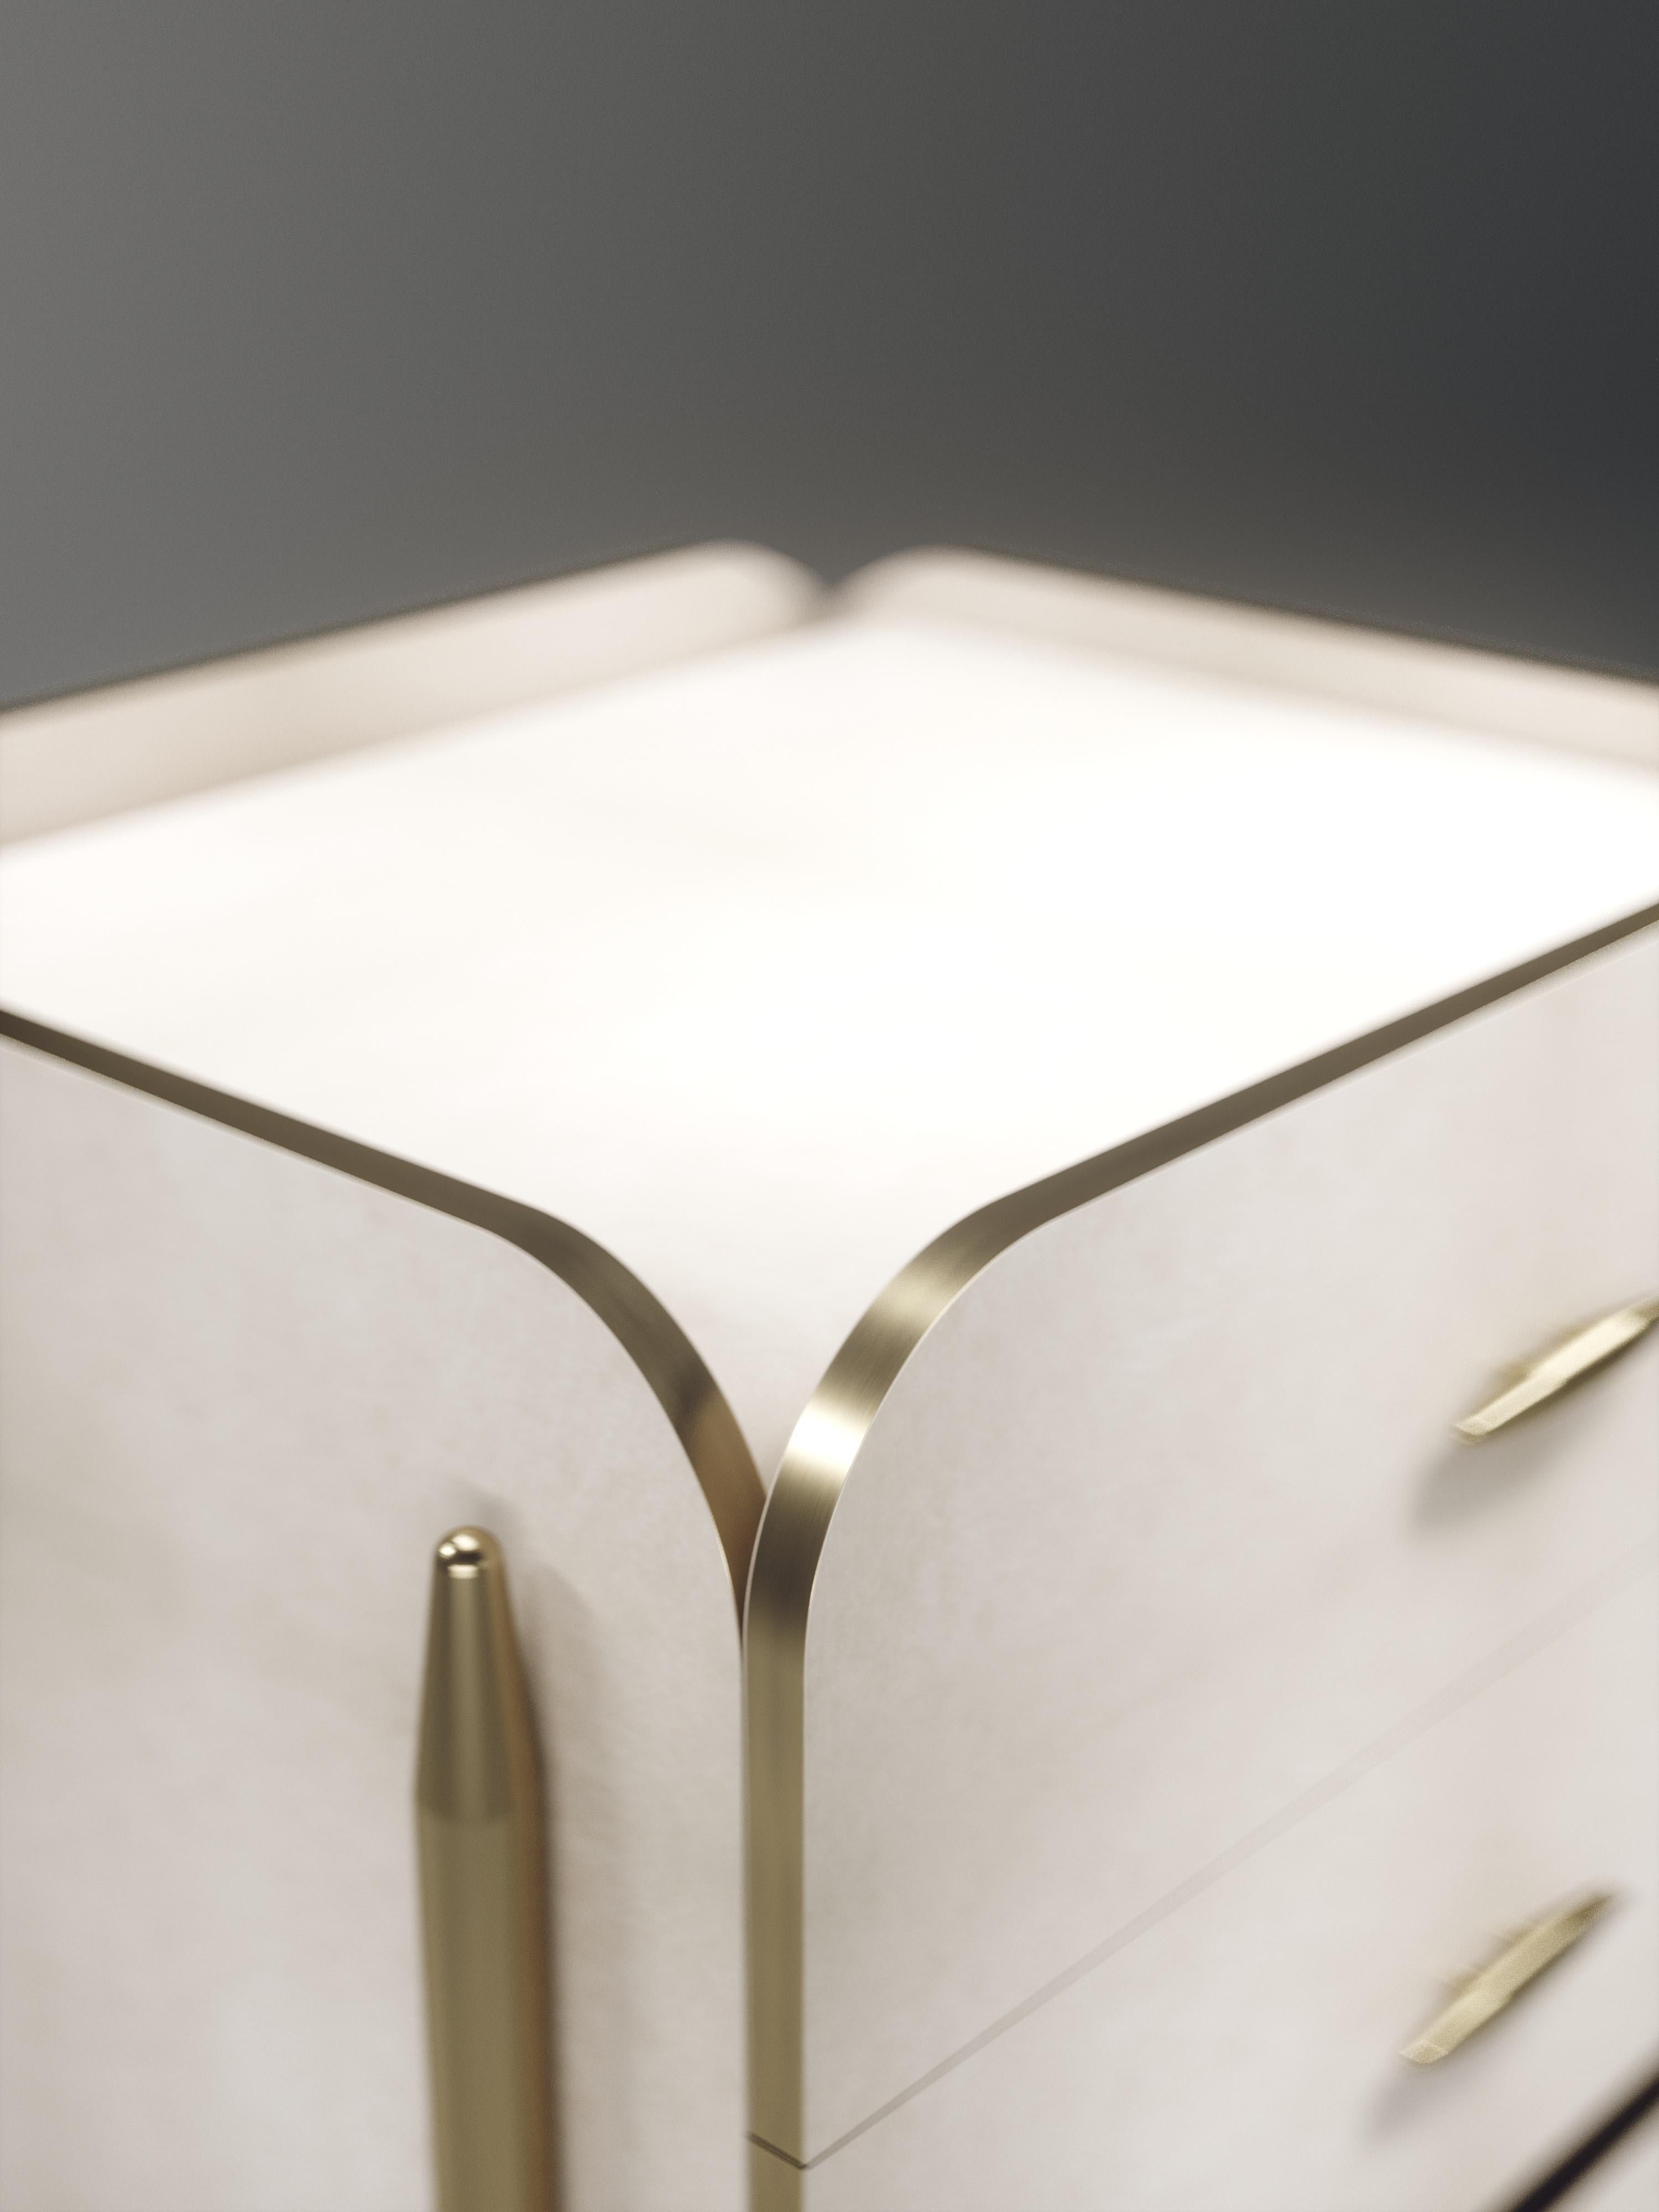 The Dandy square bedside table by Kifu Paris is an elegant and a luxurious home accent, inlaid in cream parchment with bronze-patina brass details. This piece includes 3 drawers total and the interiors are inlaid in gemelina wood veneer. Available